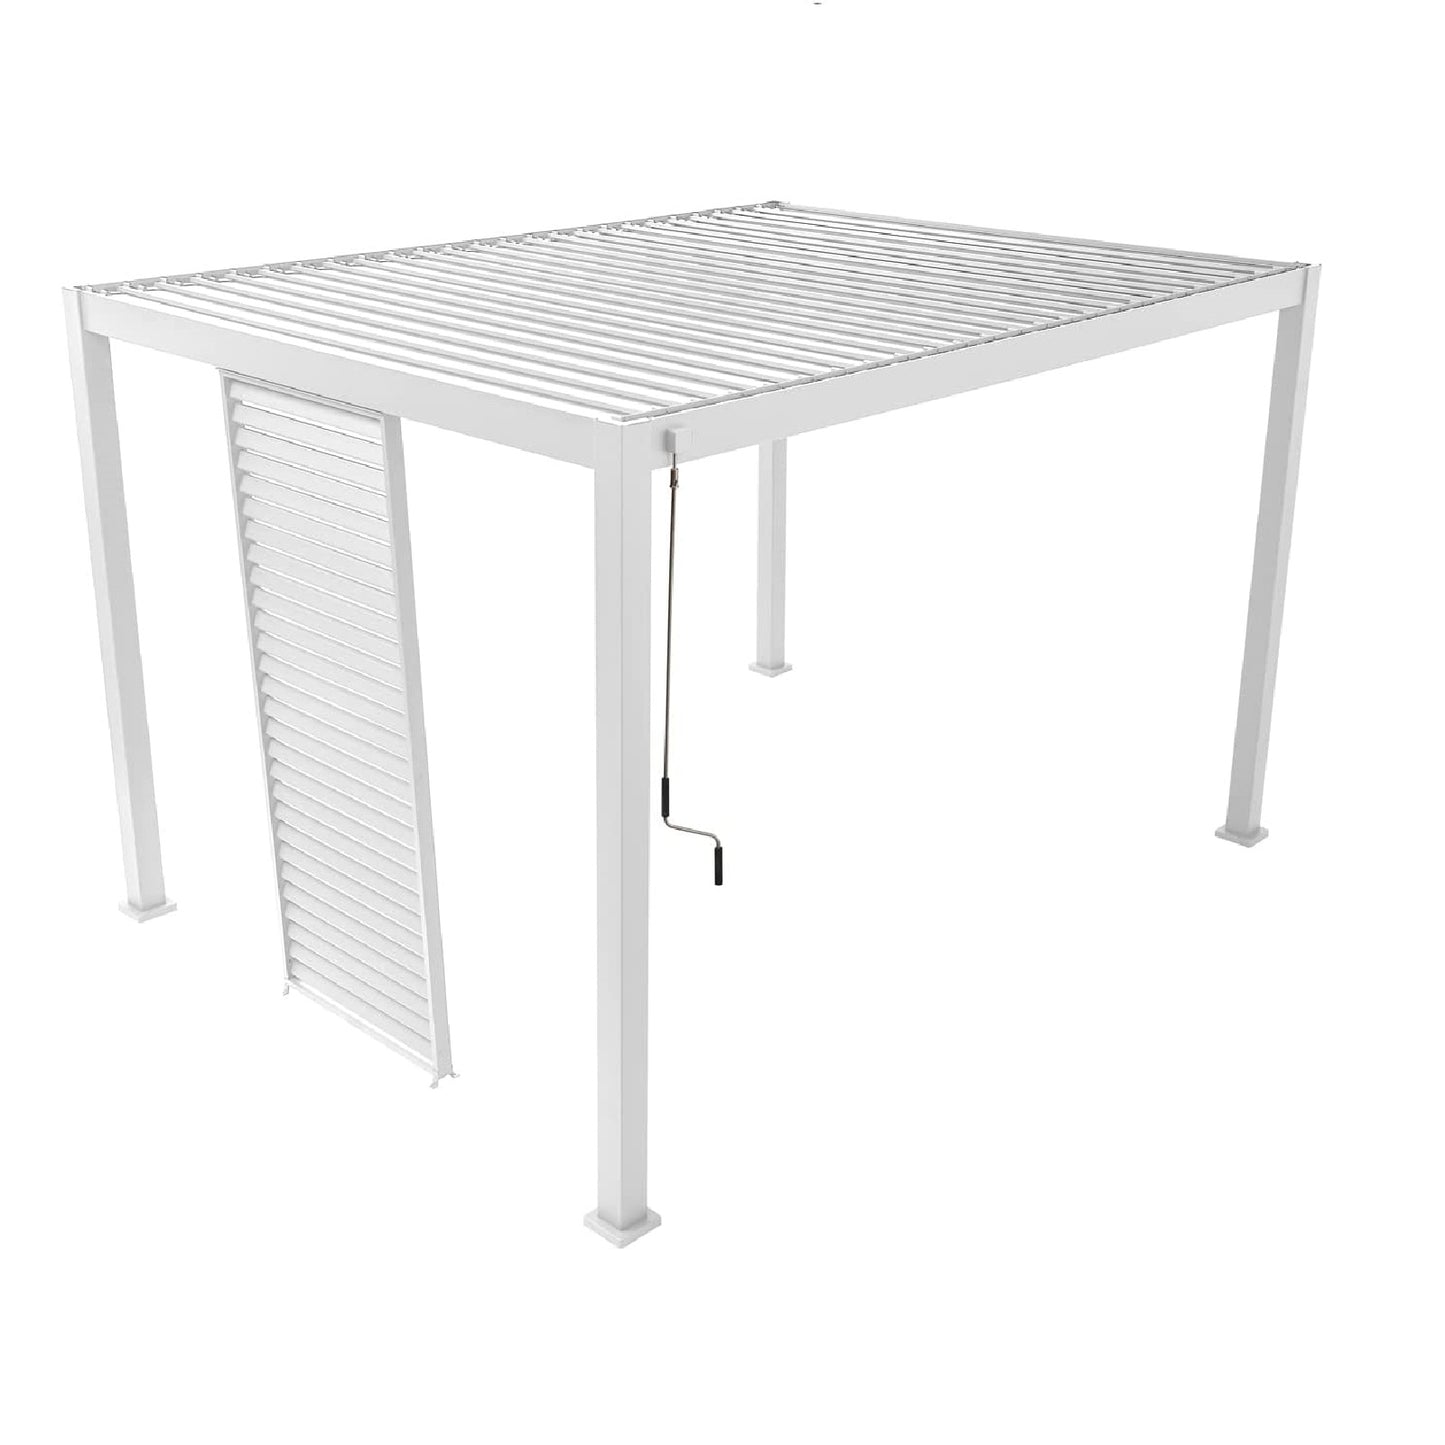 Louvered Privacy Divider Aluminum Wall  (Pergola NOT Included)